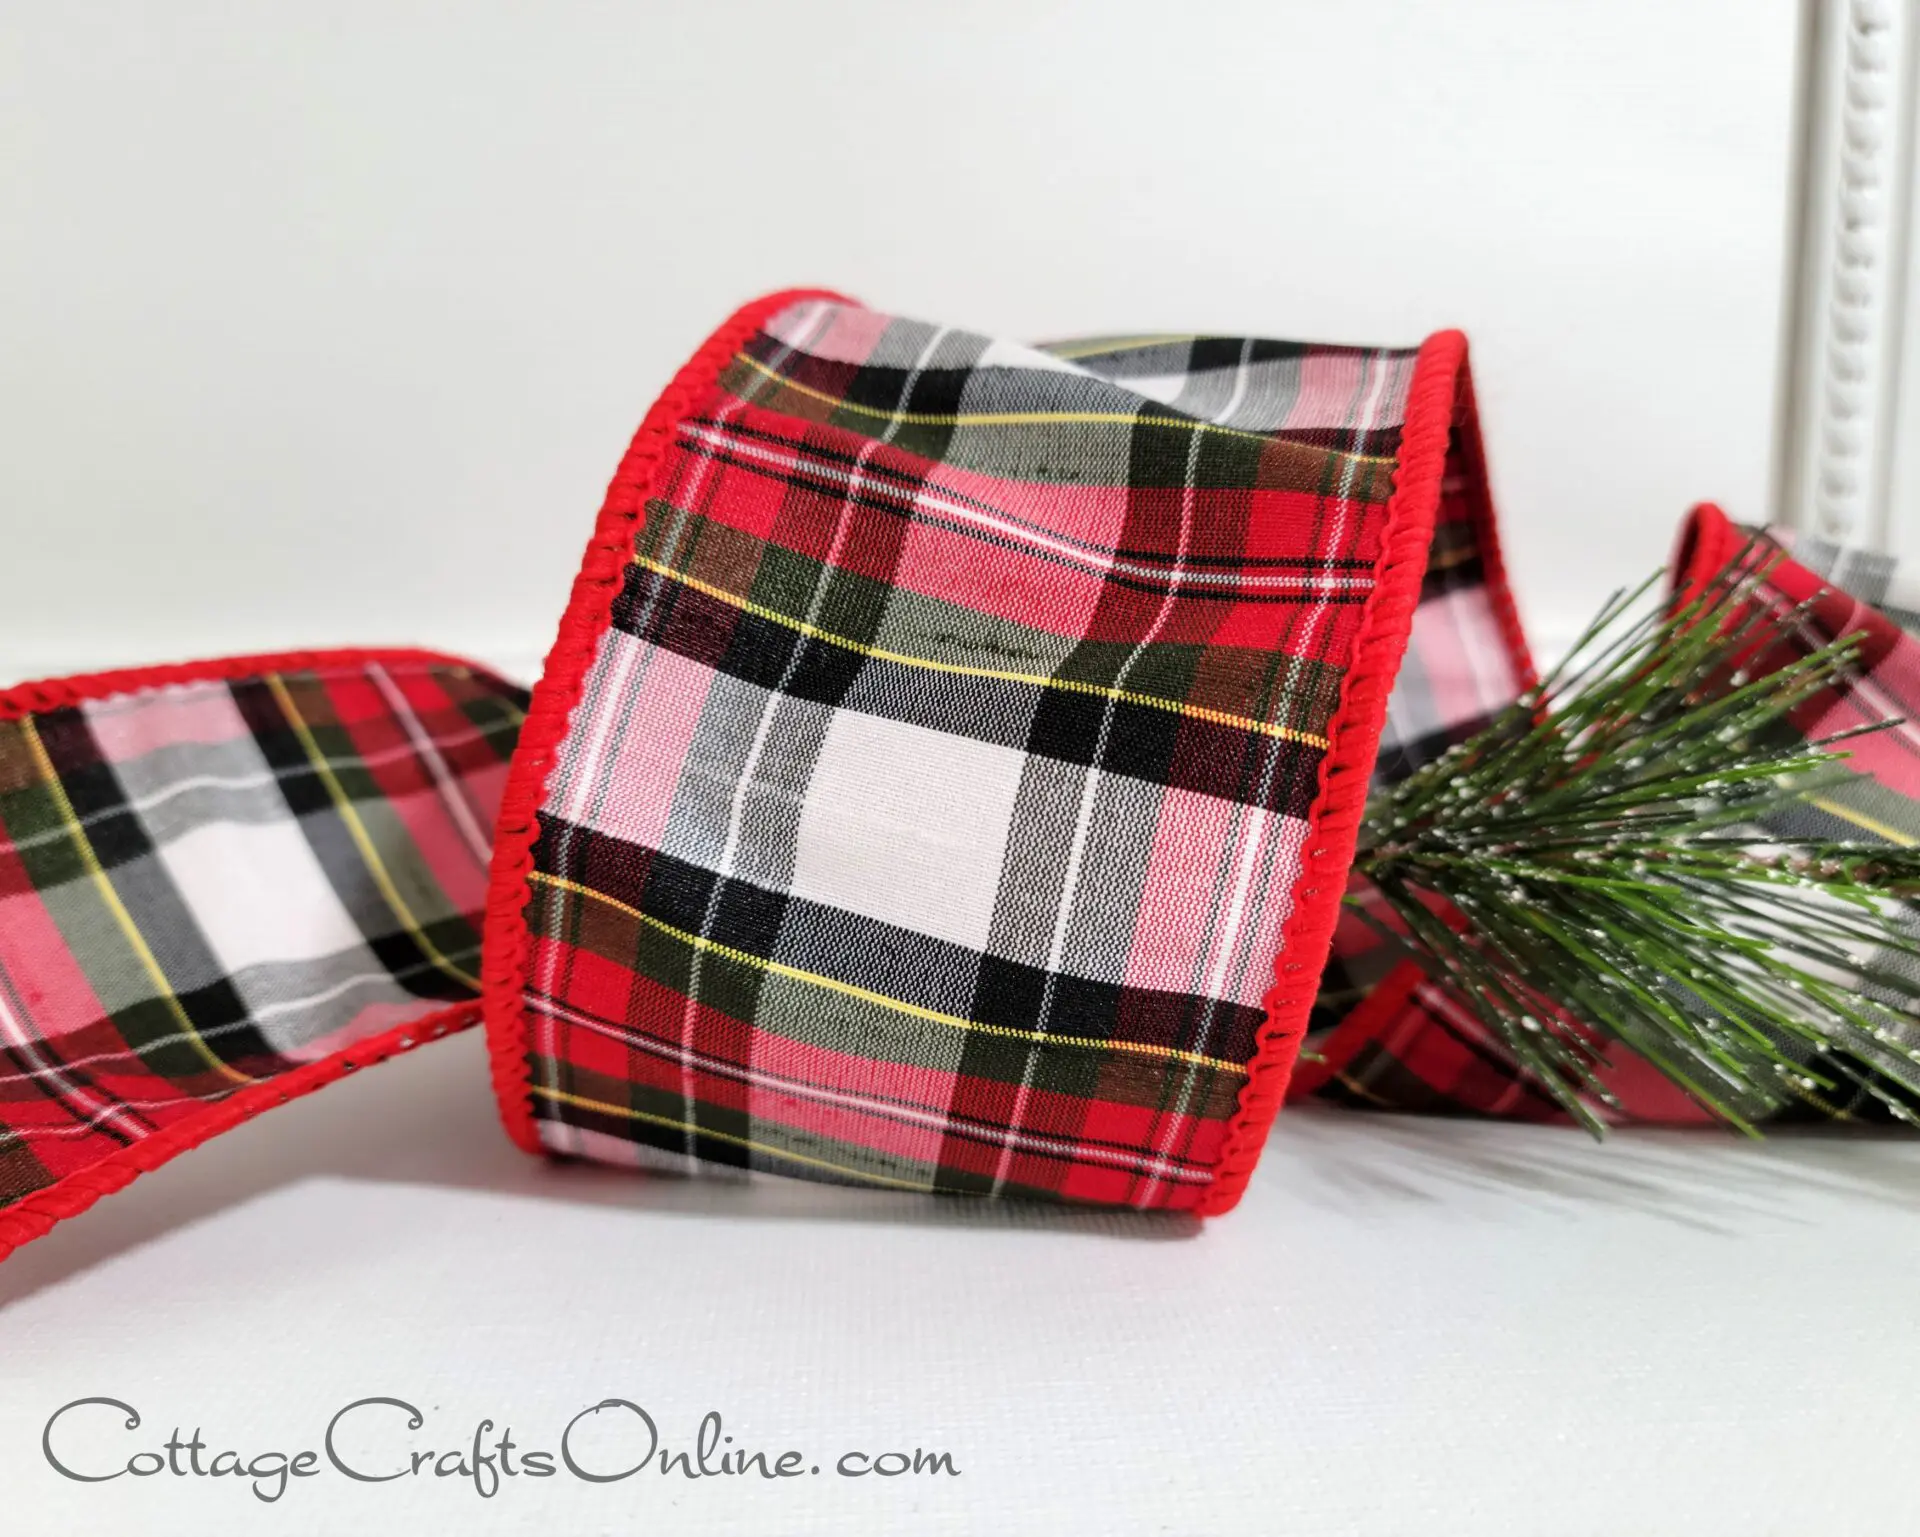 A festive plaid ribbon featuring a Christmas tree design, perfect for the t2022 holiday season.